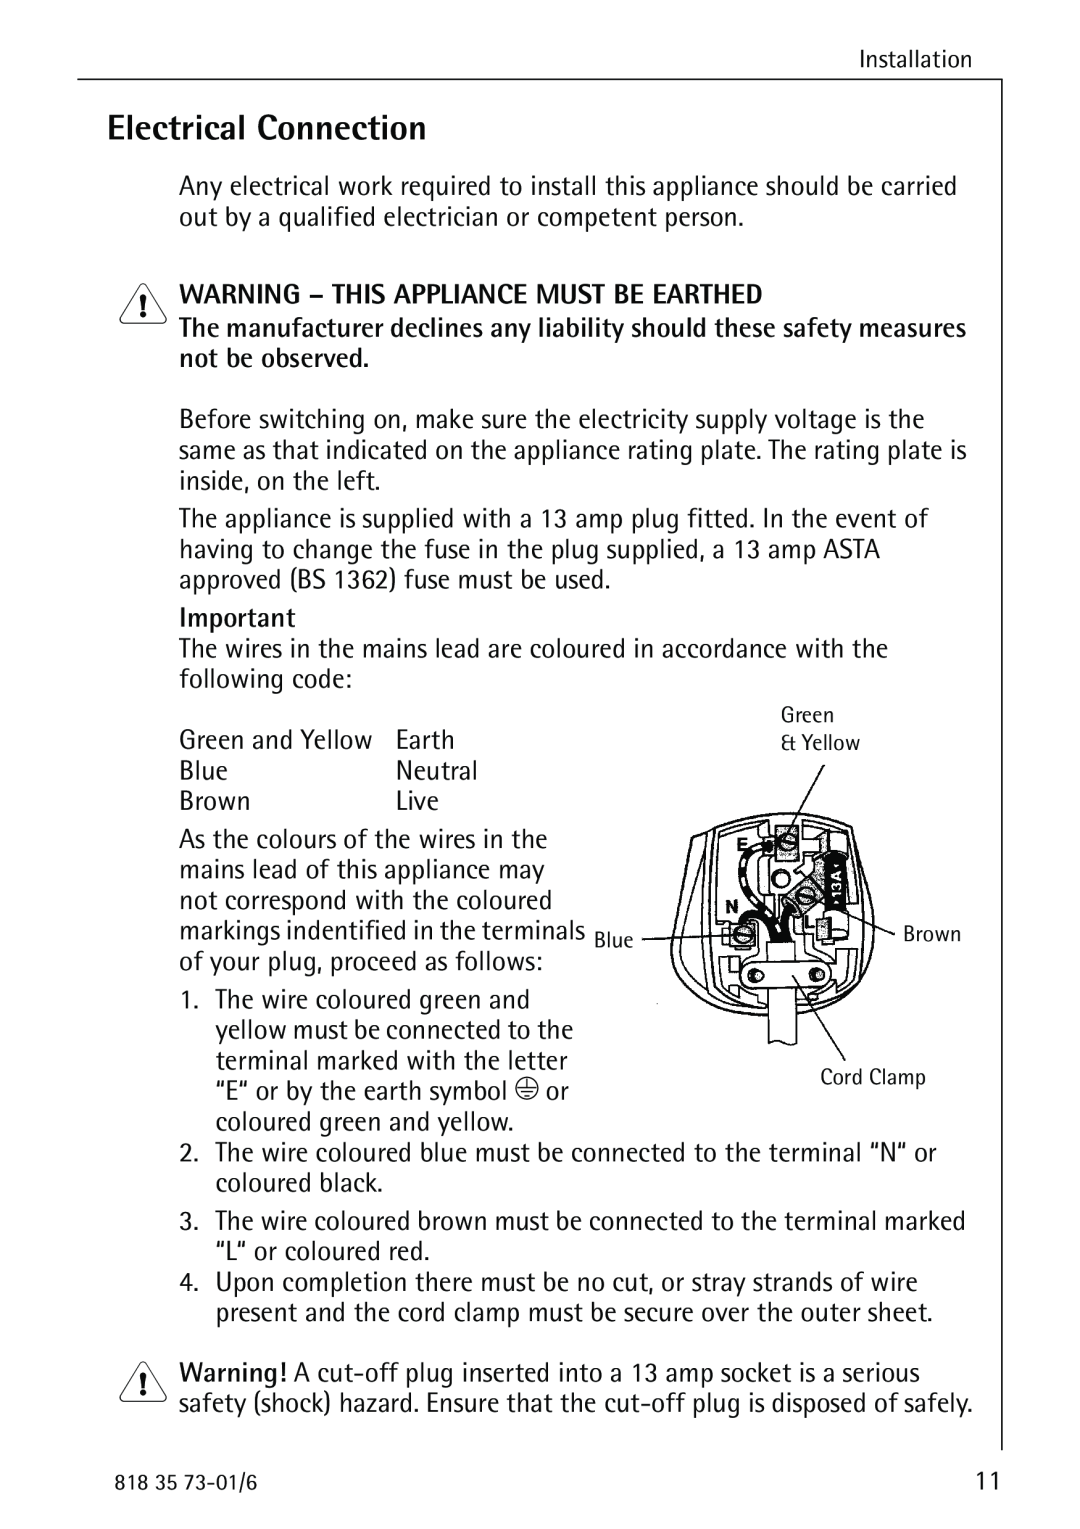 Electrolux SANTO 72340 KA operating instructions Electrical Connection, Warning - This Appliance Must Be Earthed 